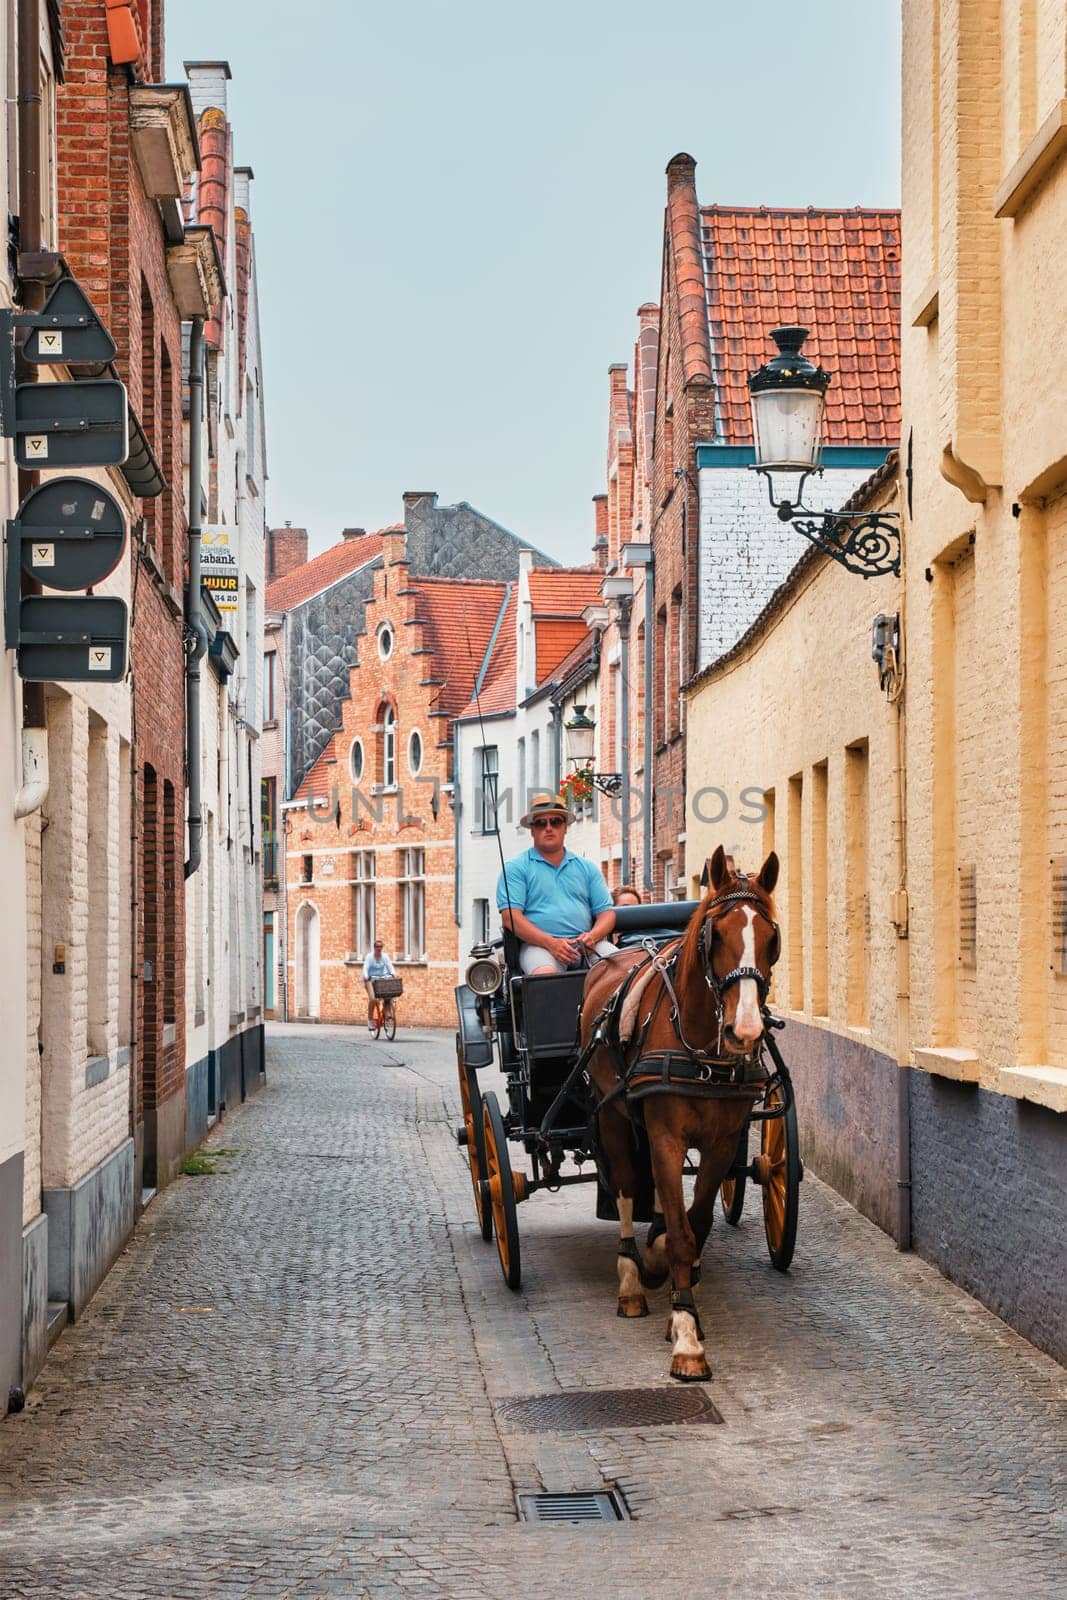 Bruges, Belgium - May 29, 2018: Horse cart for tourists in street of Brugge with old houses and cobblestone road